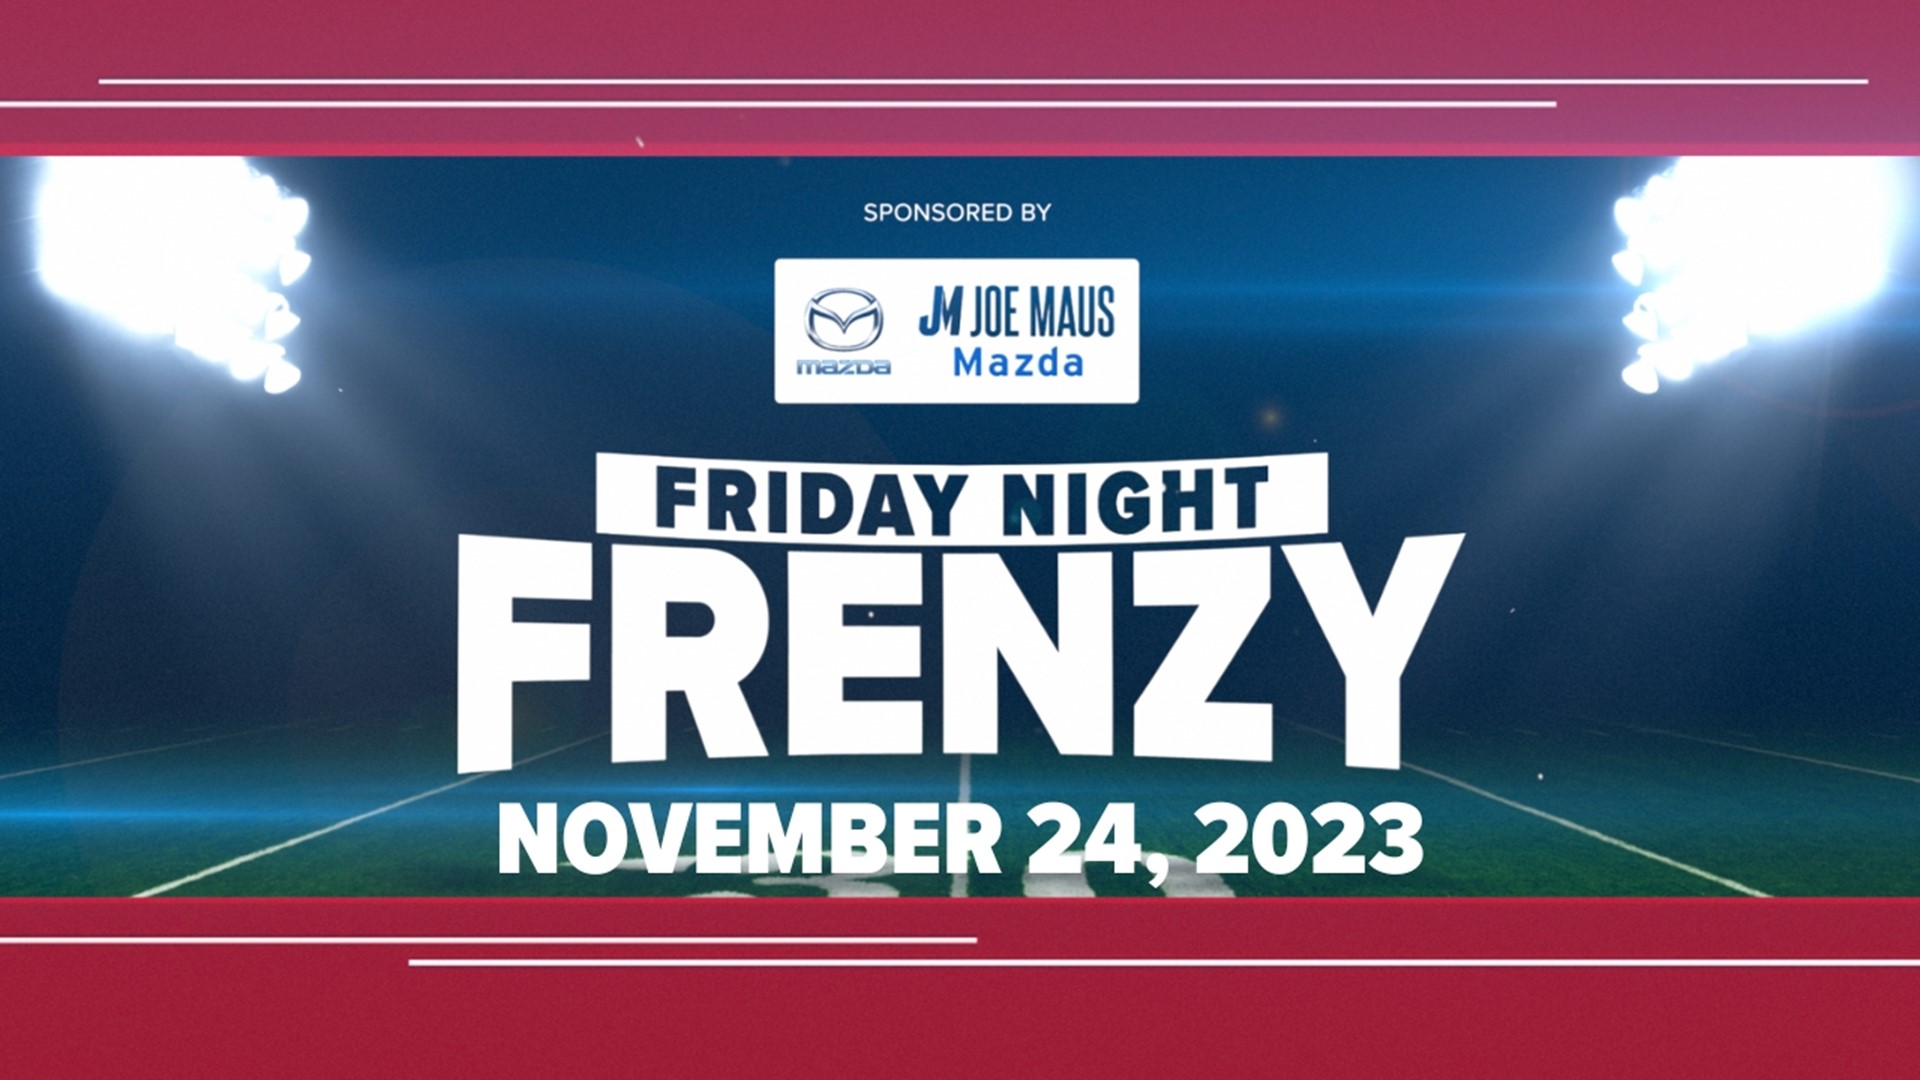 Two more matchups are featured as we hit Week 4 of the playoffs and Week 15 of Friday Night Frenzy!